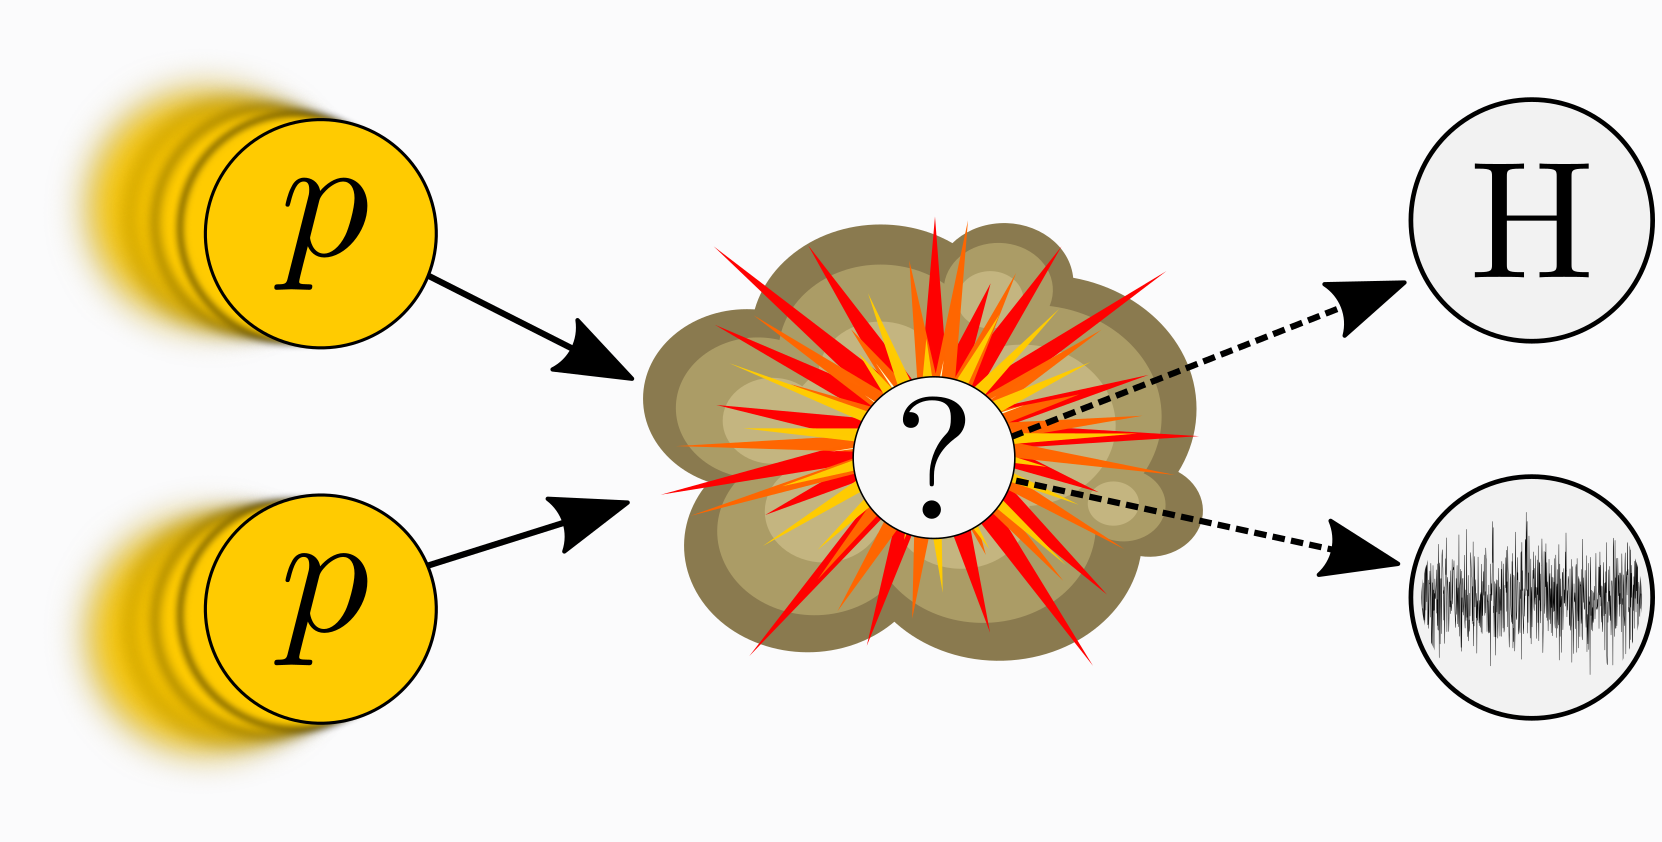 Diagram showing many elementary particles flying out from a central interaction point that may have produced a Higgs boson.